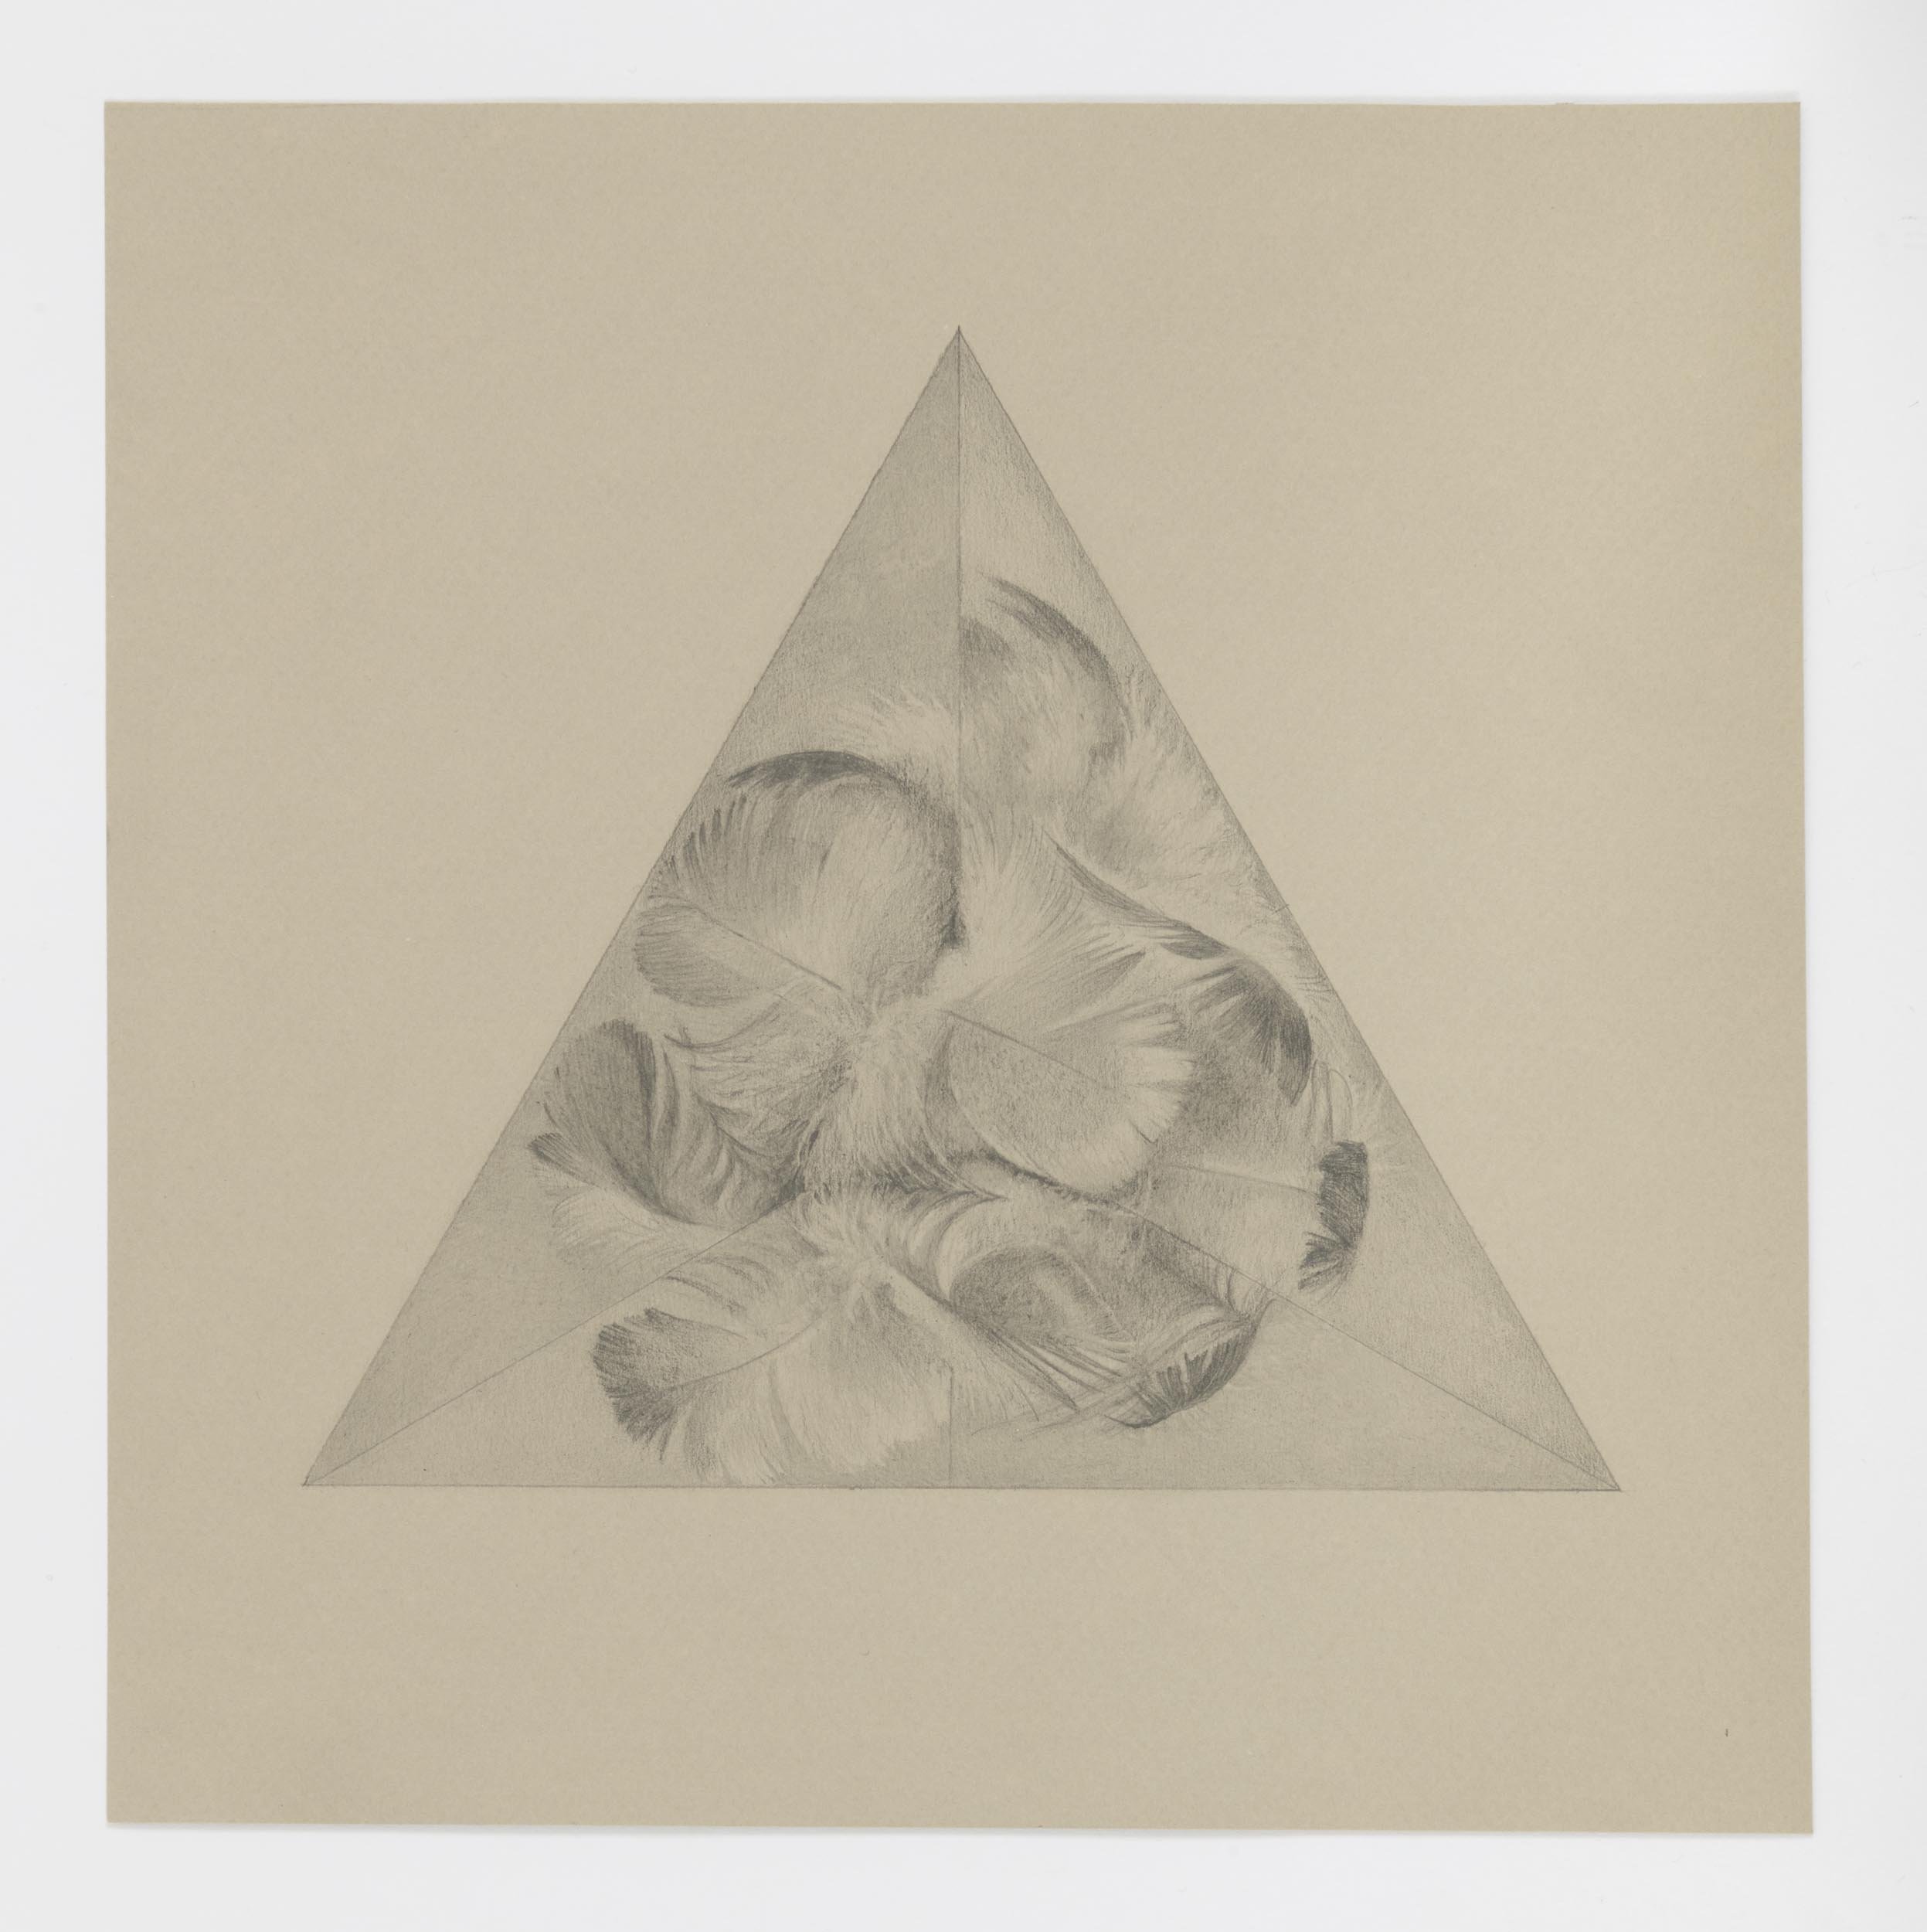  Pyramid Feather, 2021 graphite on paper 10.5 x 10.5 in. &nbsp; 26.7 x 26.7 cm. 